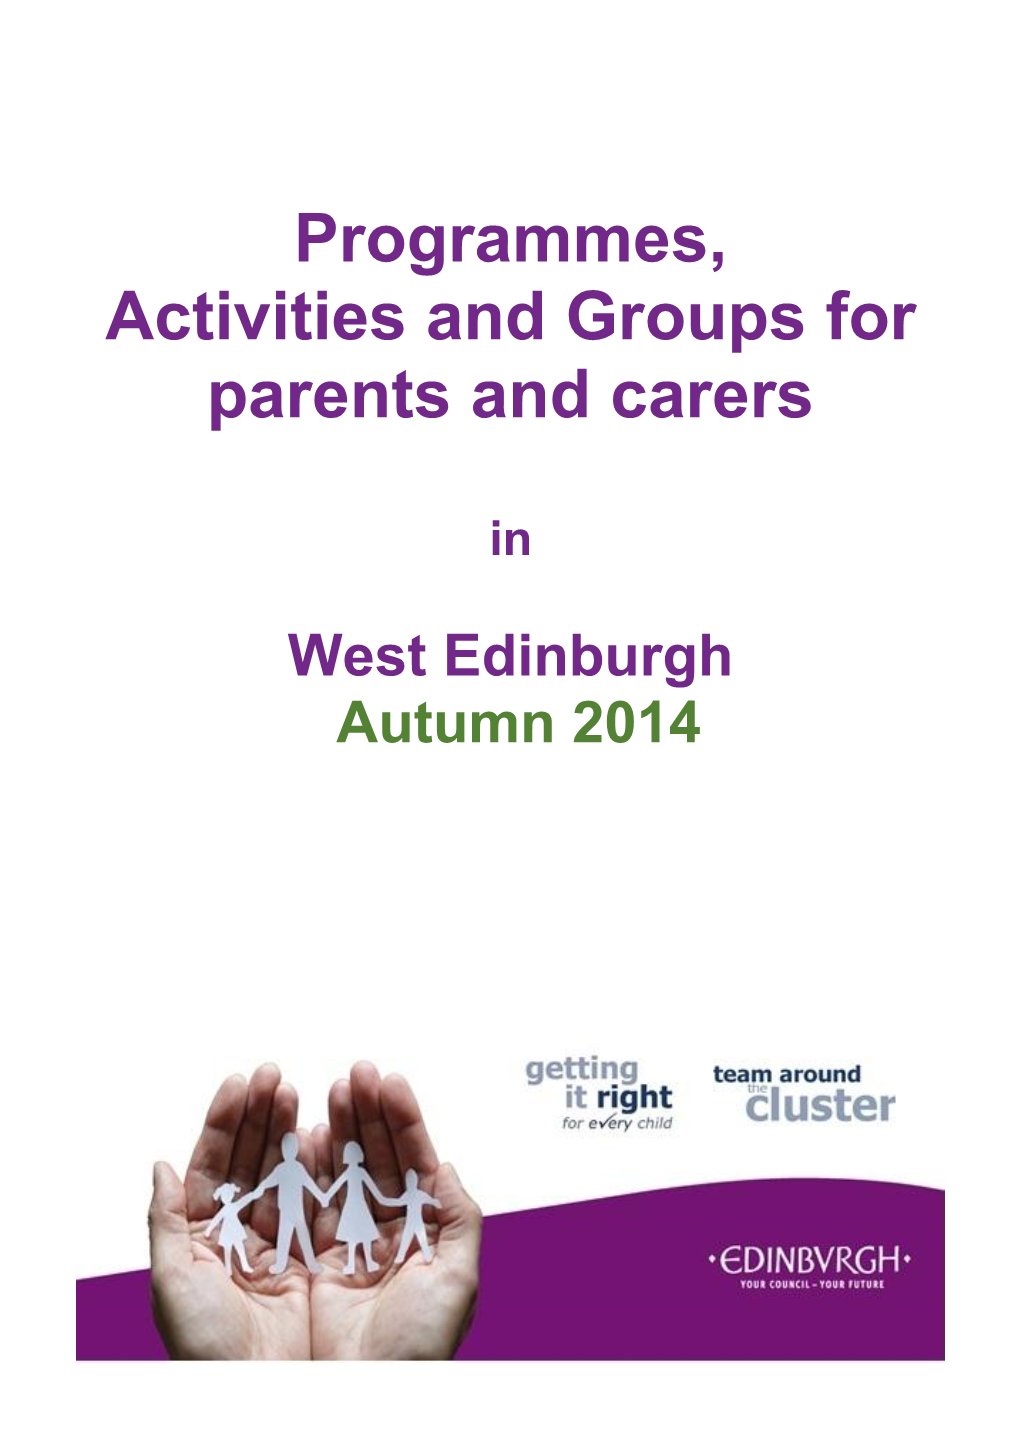 Groups & Programmes for Parents and Carers